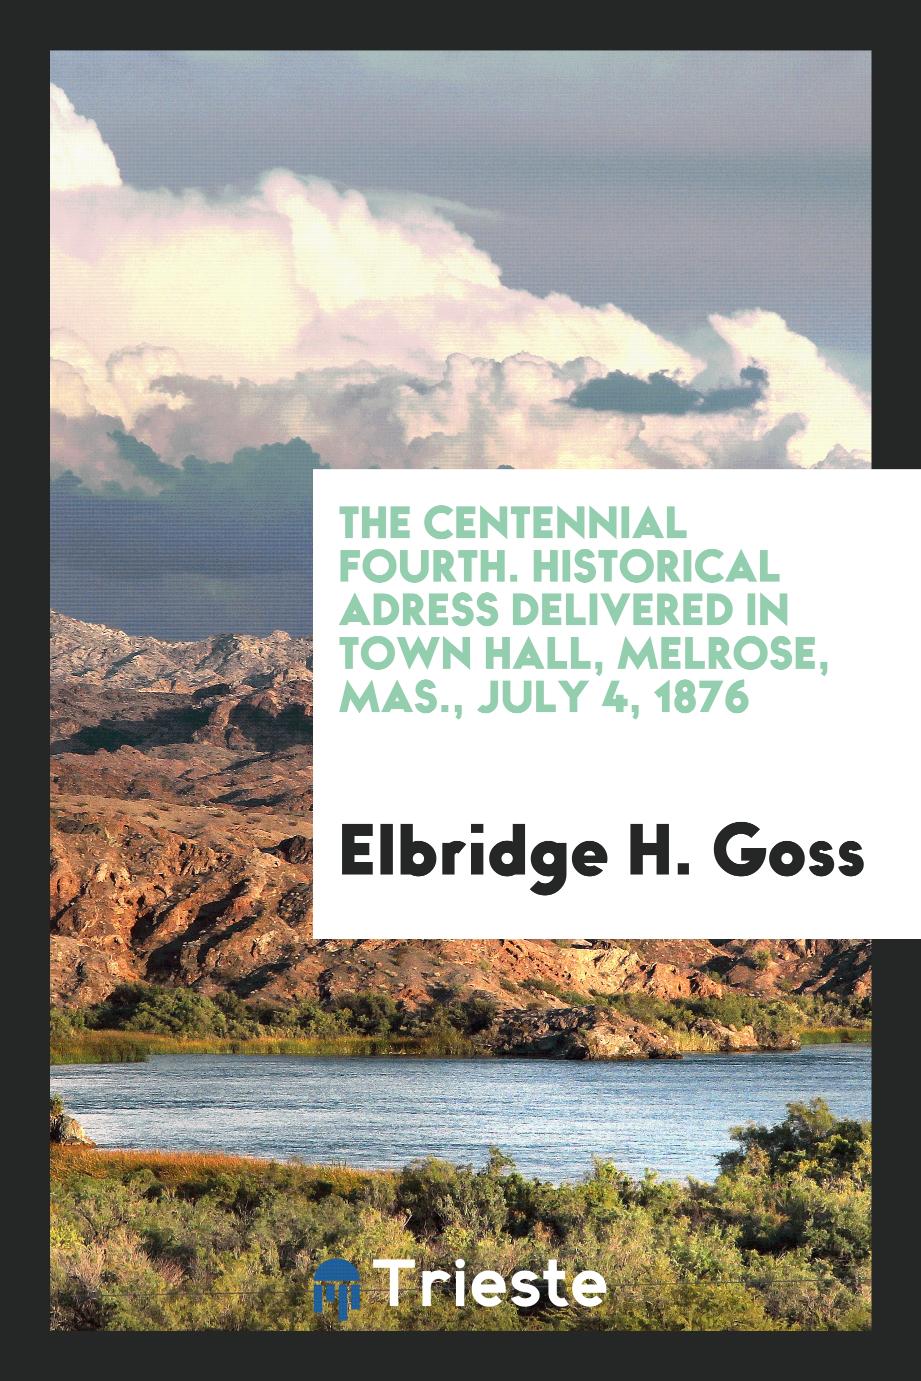 The centennial Fourth. Historical Adress delivered in Town Hall, Melrose, Mas., July 4, 1876